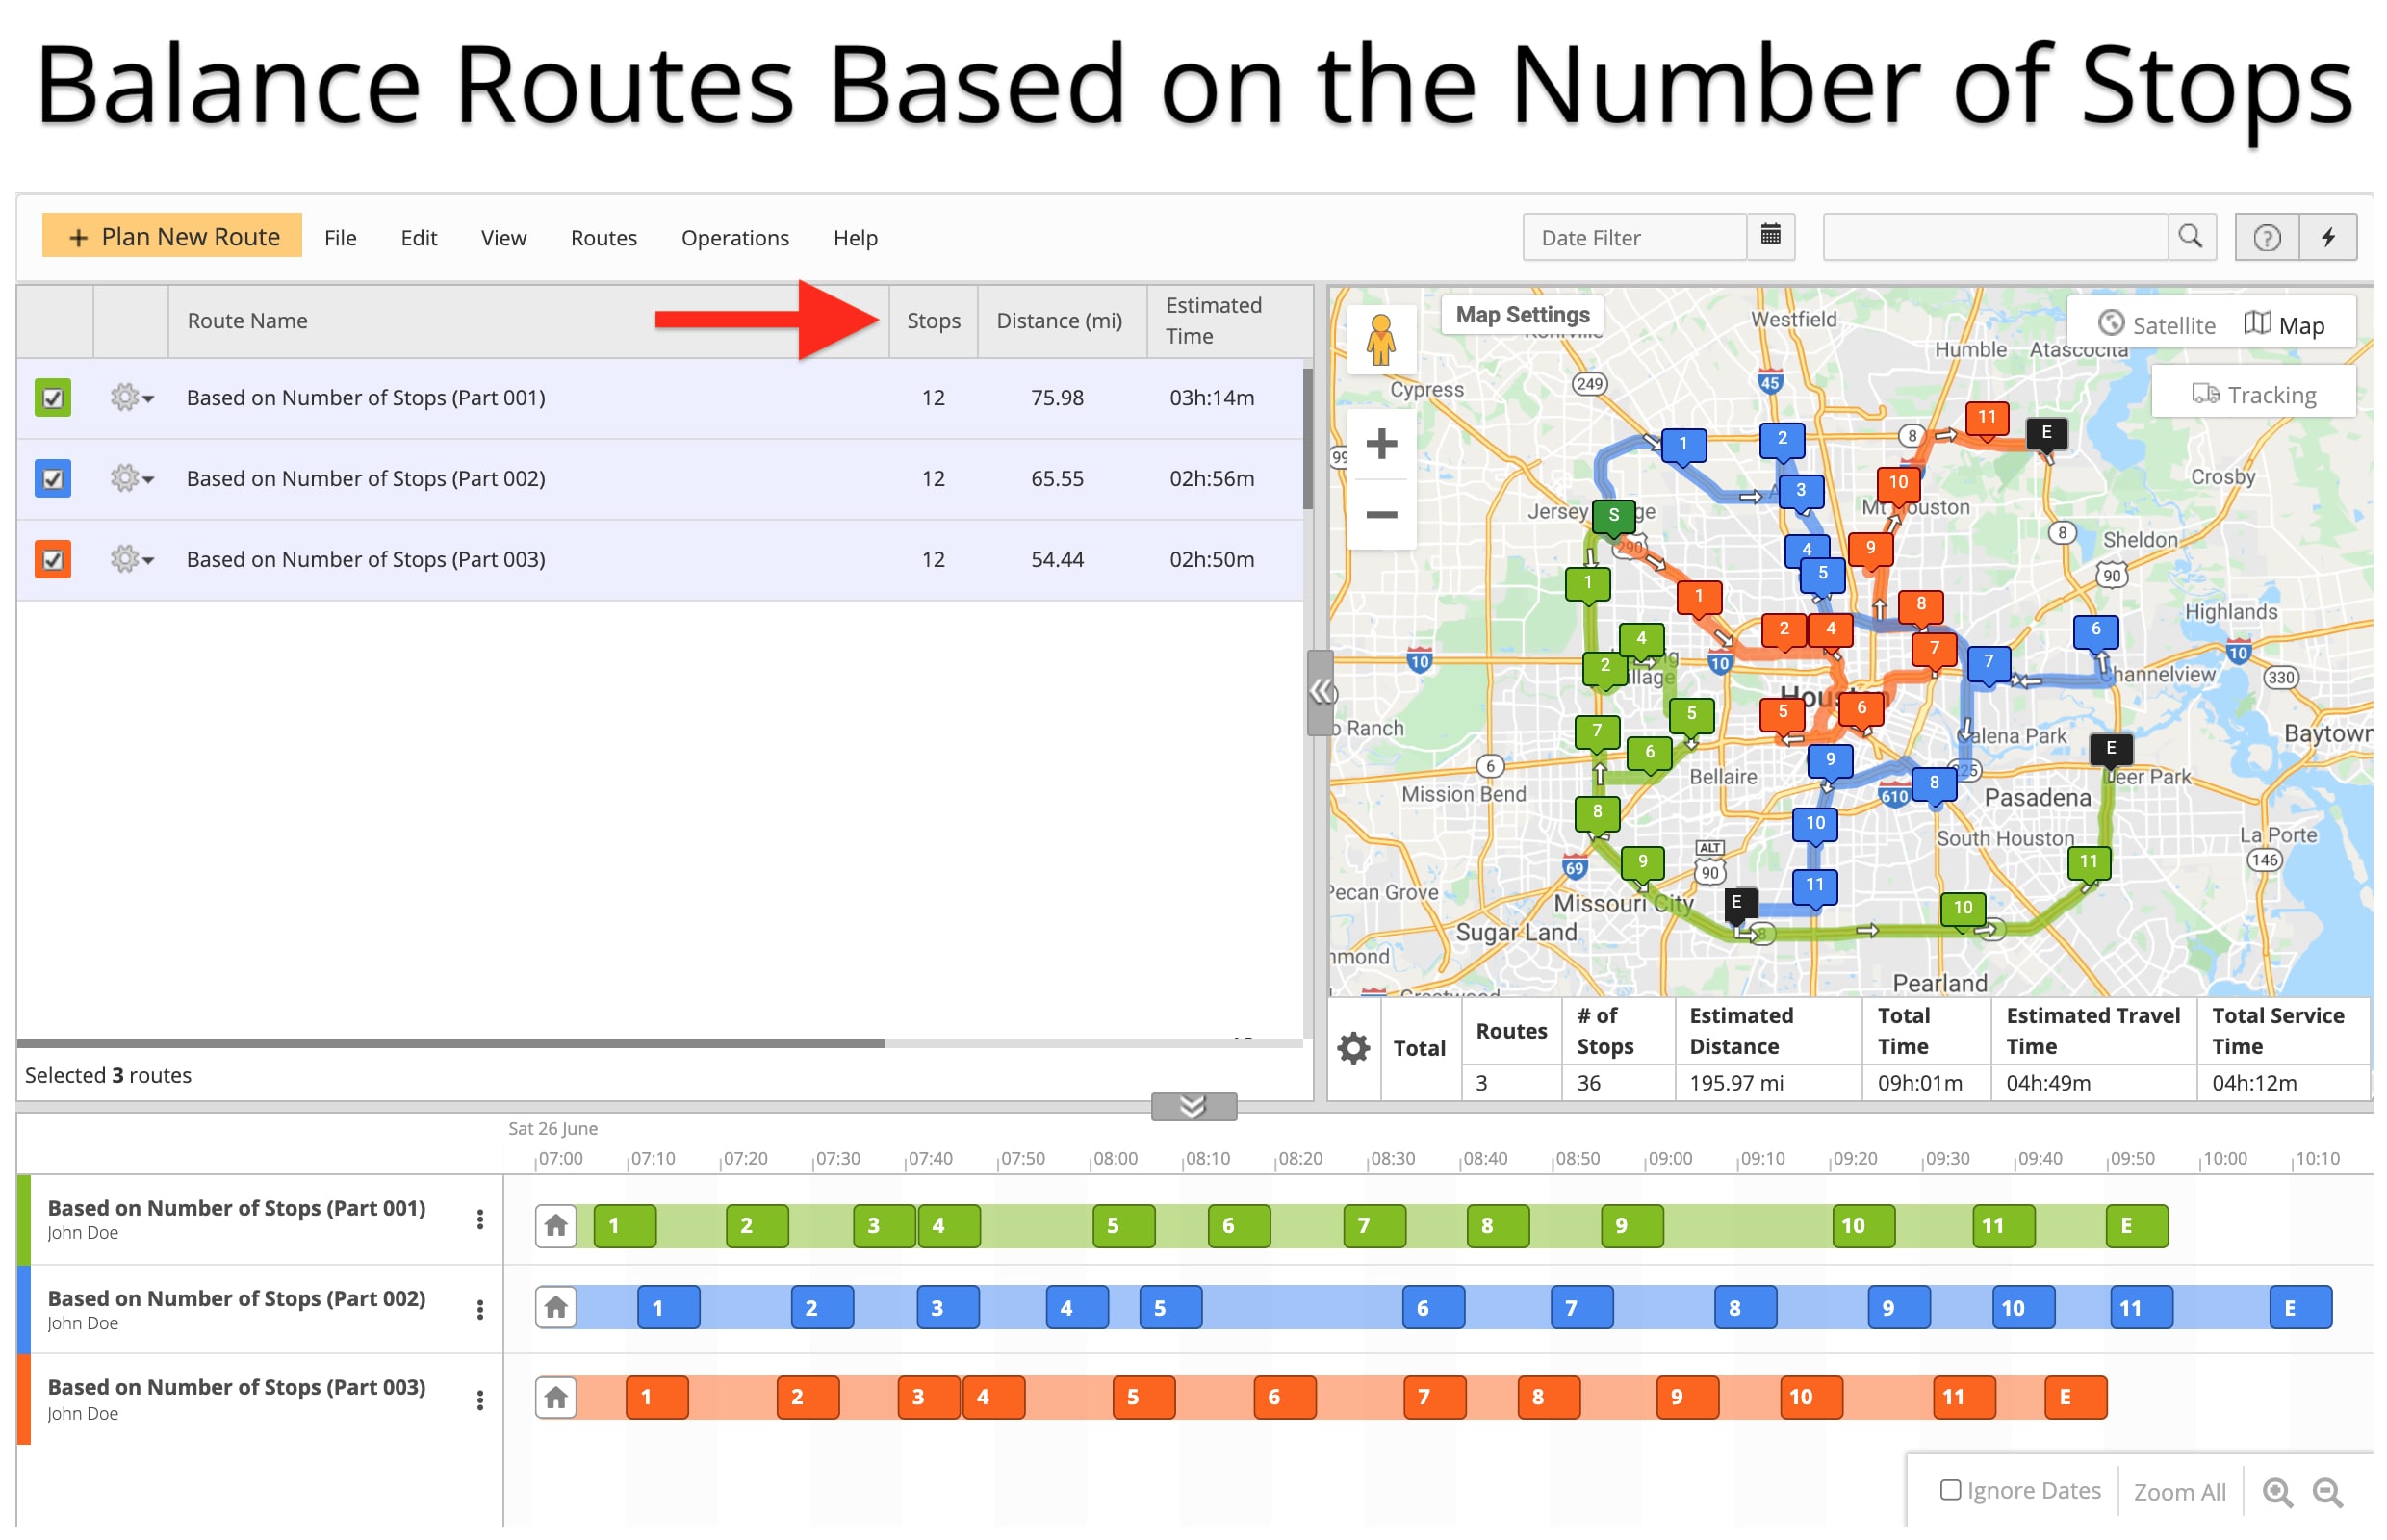 Route balancing with the route stops distribution for a specific number of locations per route.